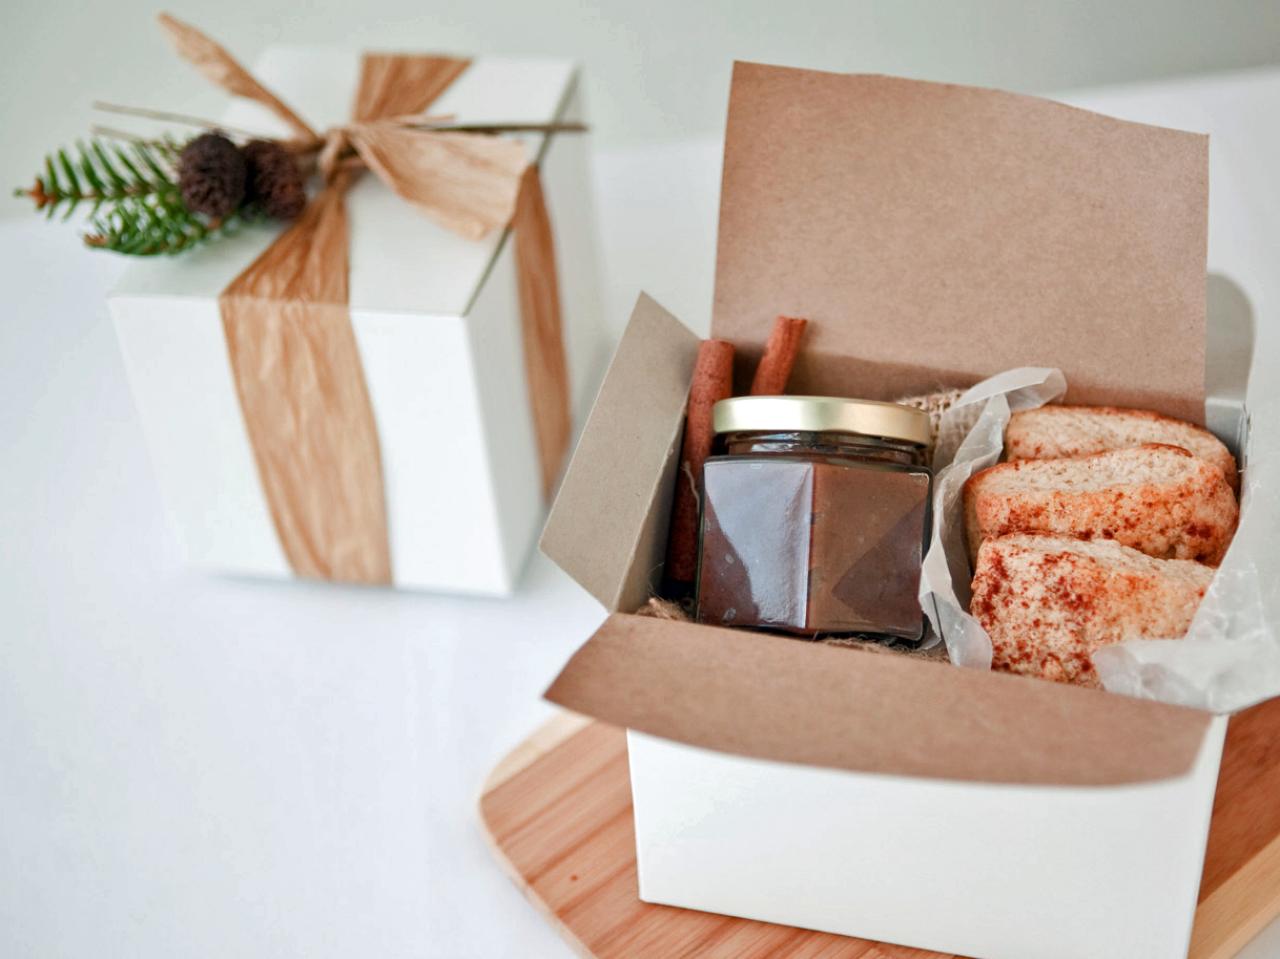 DIY House Gift Boxes, The Perfect Gift